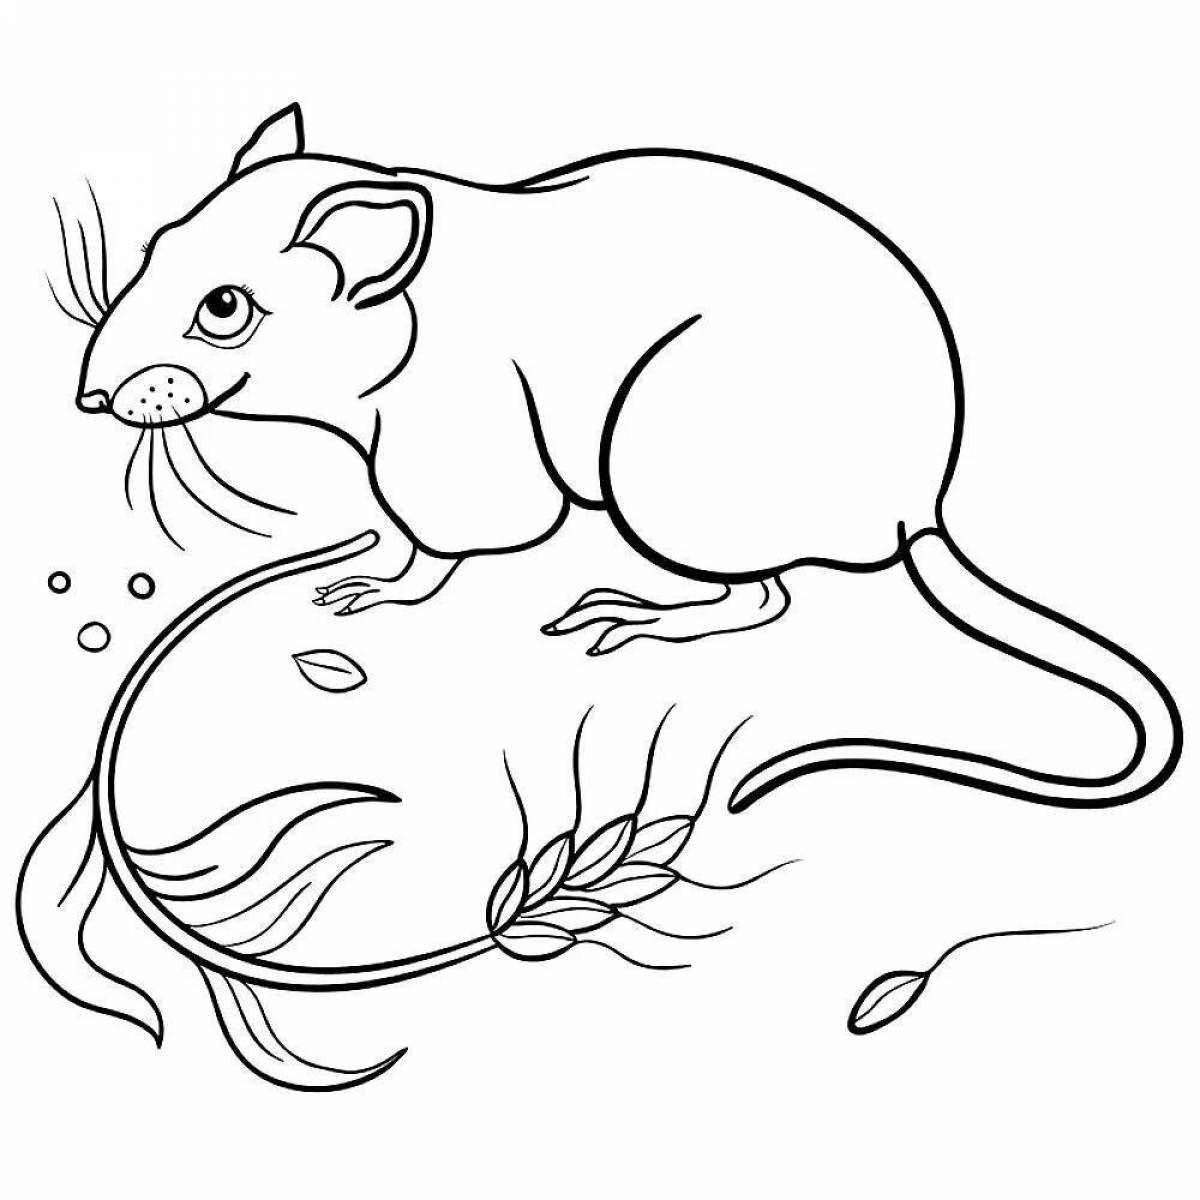 Colorful dormouse coloring page